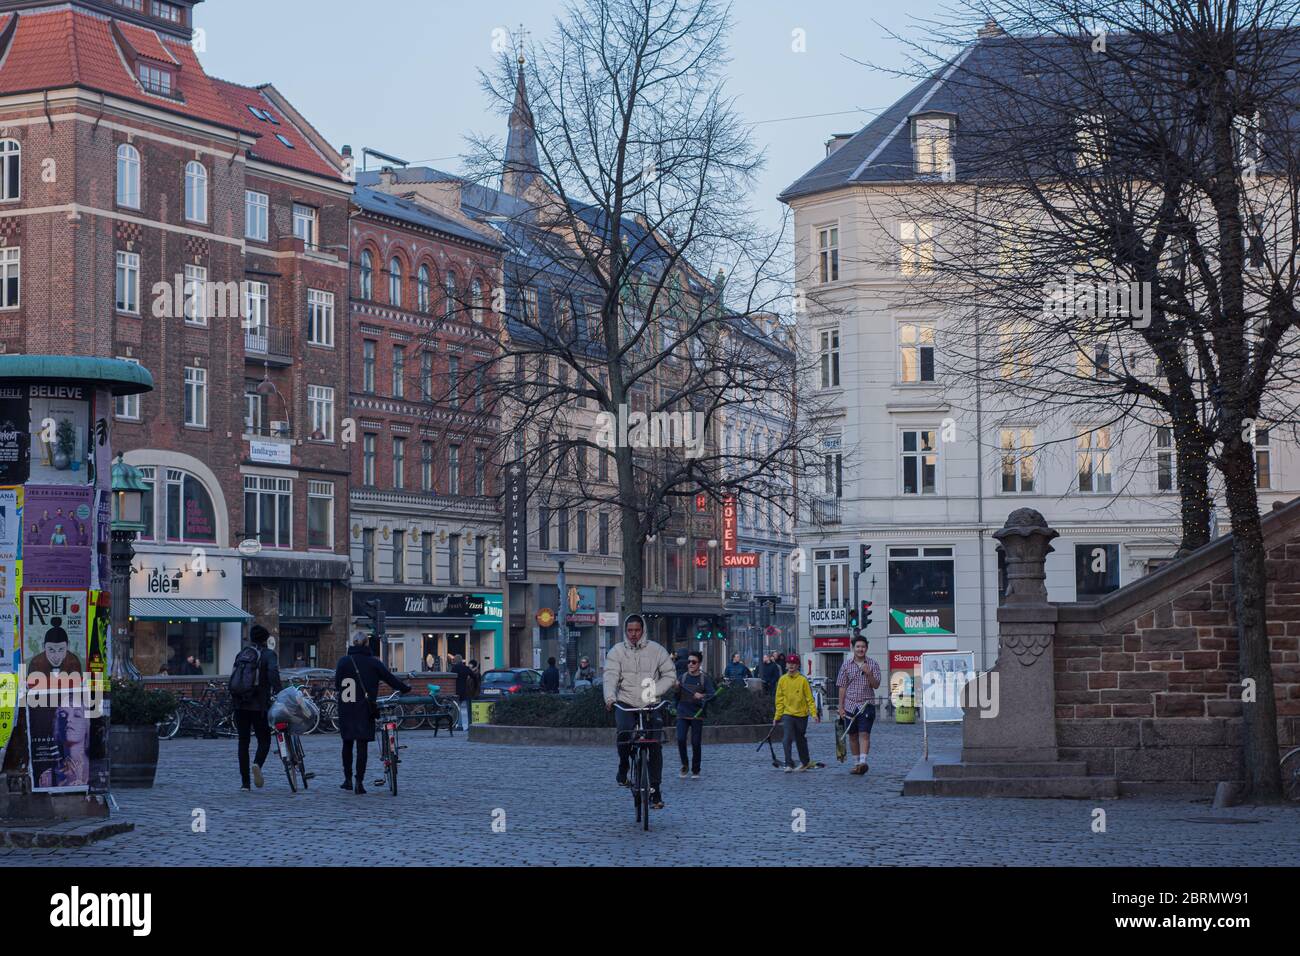 ARCHITECTURE AND PEOPLE IN THE STREET, COPENHAGUE, DENMARK Stock Photo